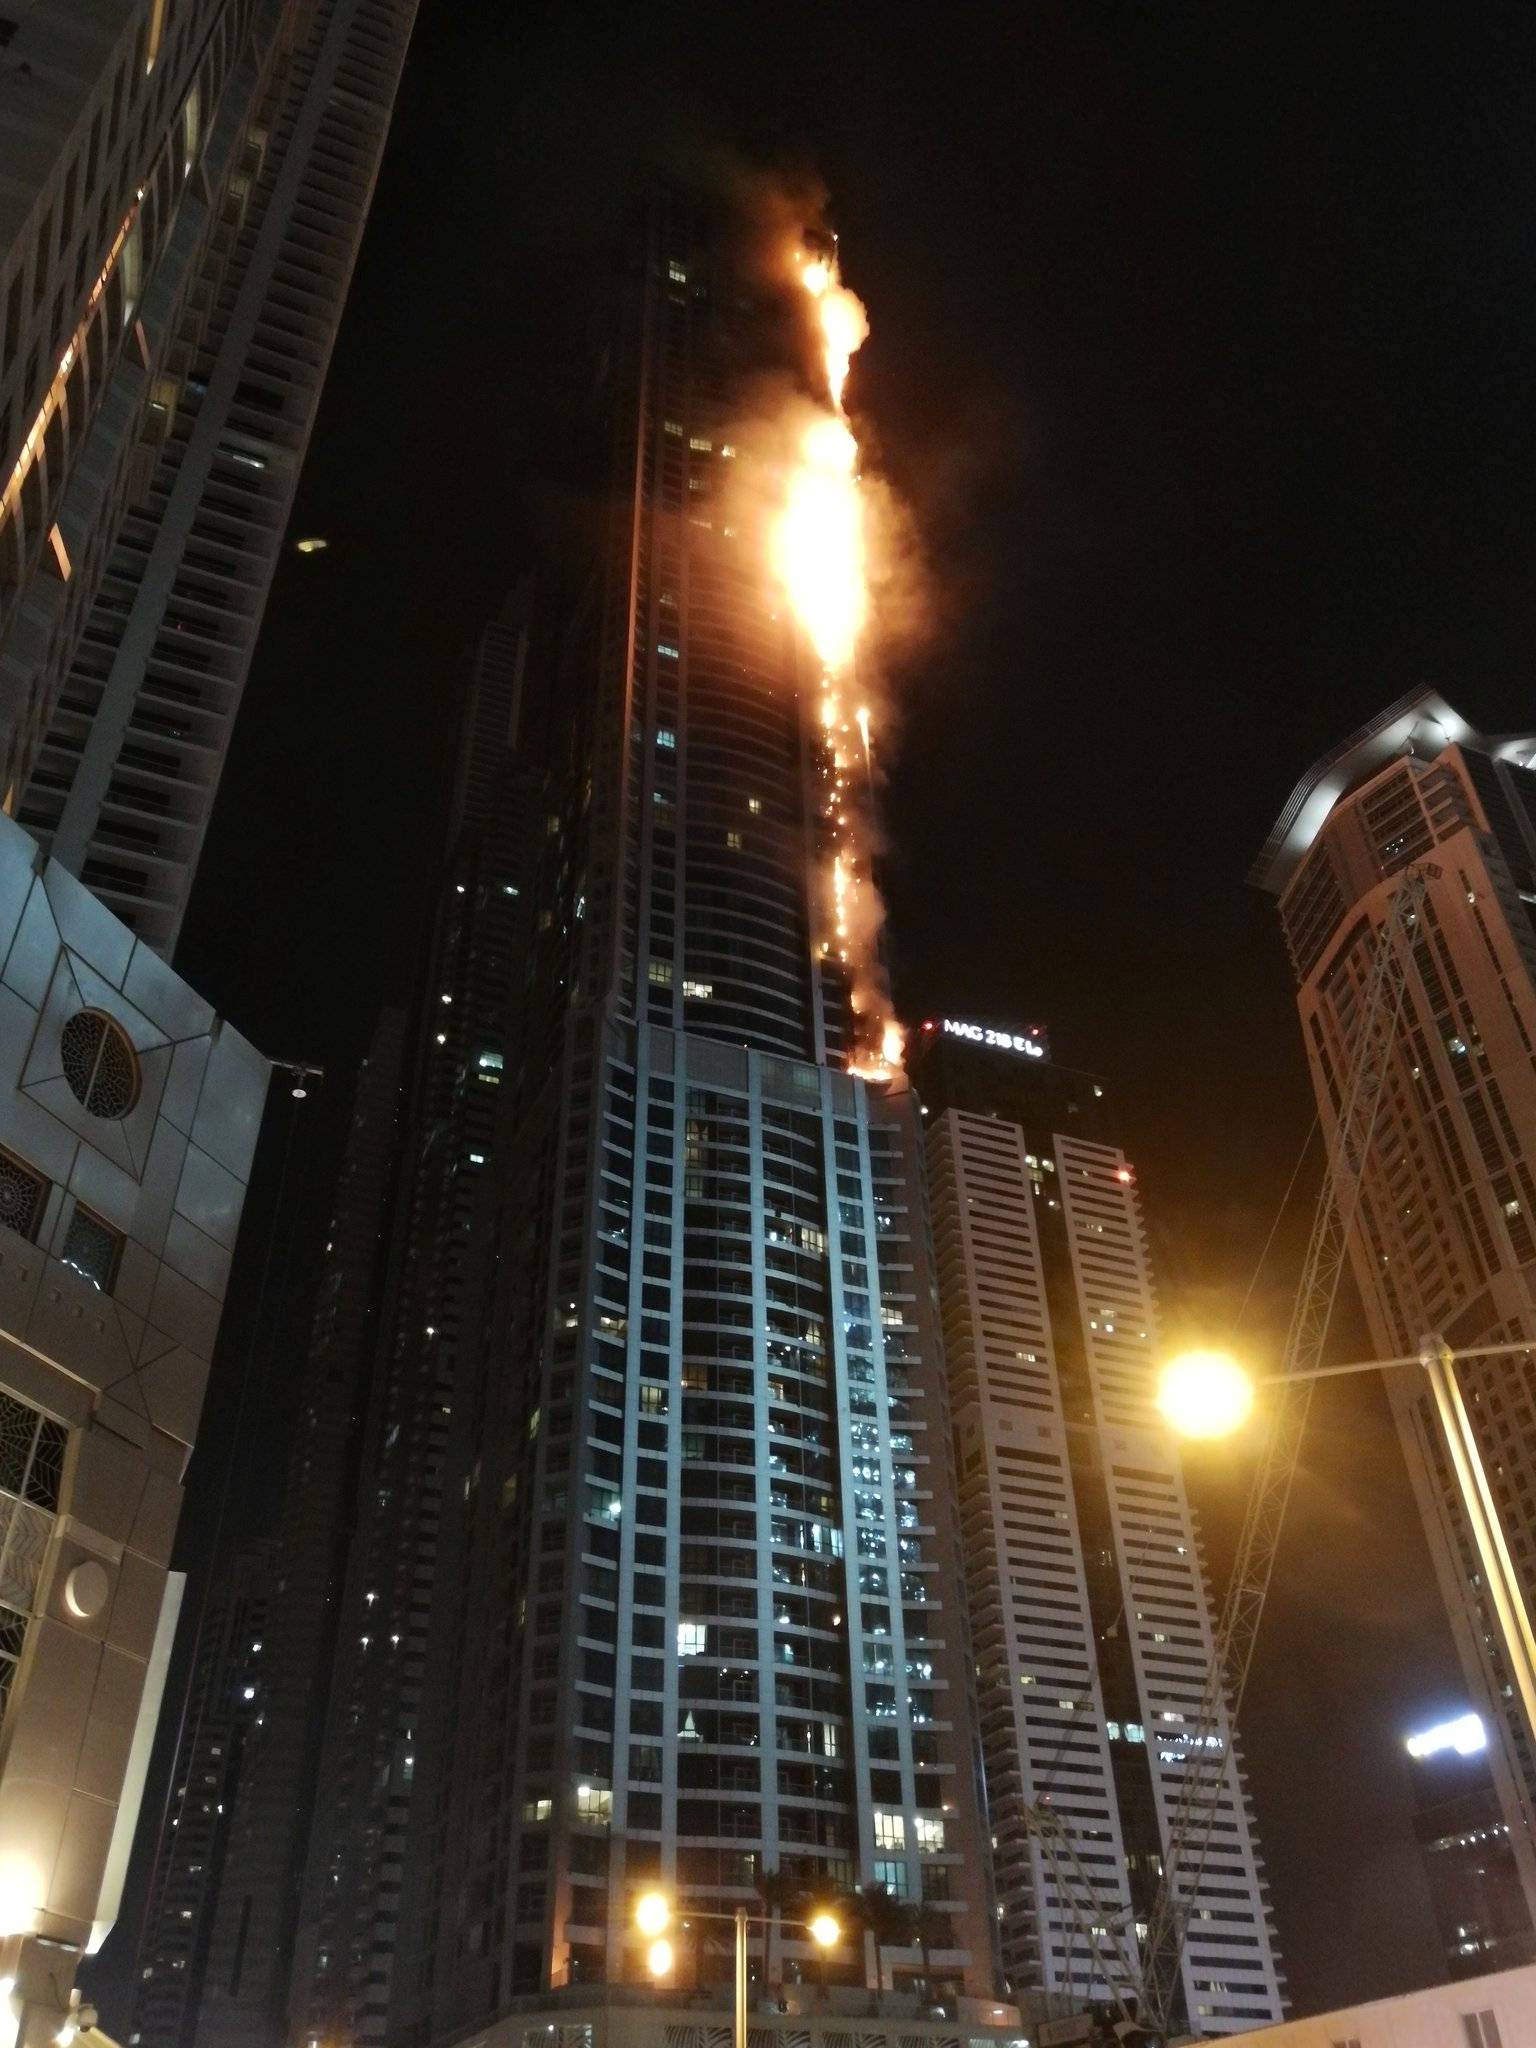 Flames shoot up the sides of the Torch tower residential building in the Marina district, Dubai, United Arab Emirates in this picture by Mitch Williams